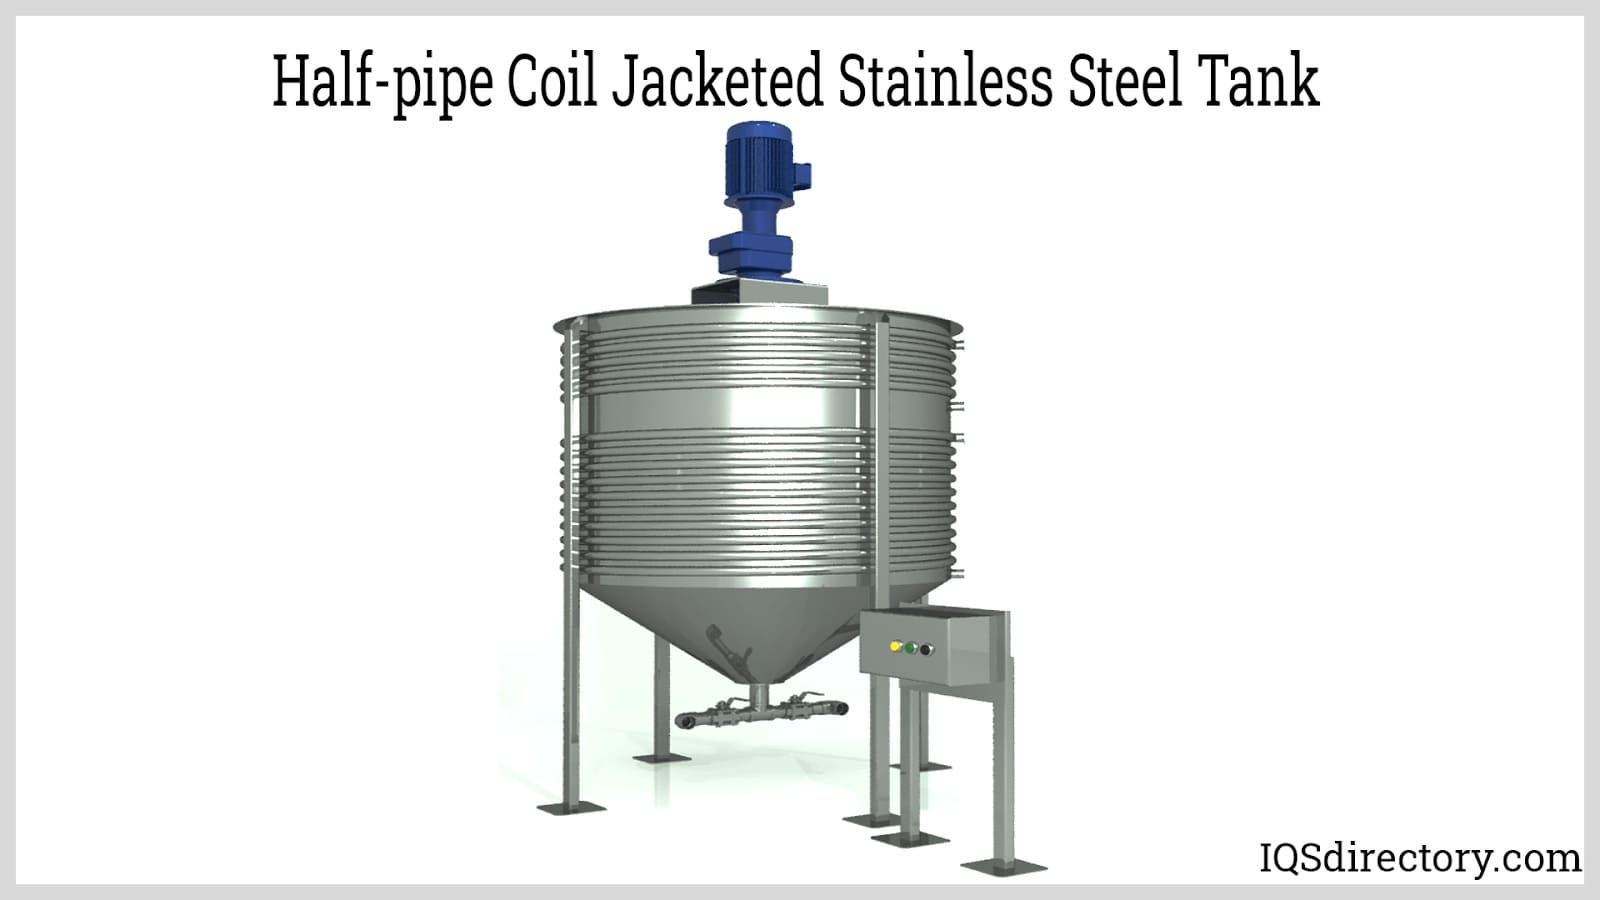 Half-pipe Coil Jacketed Stainless Steel Tank